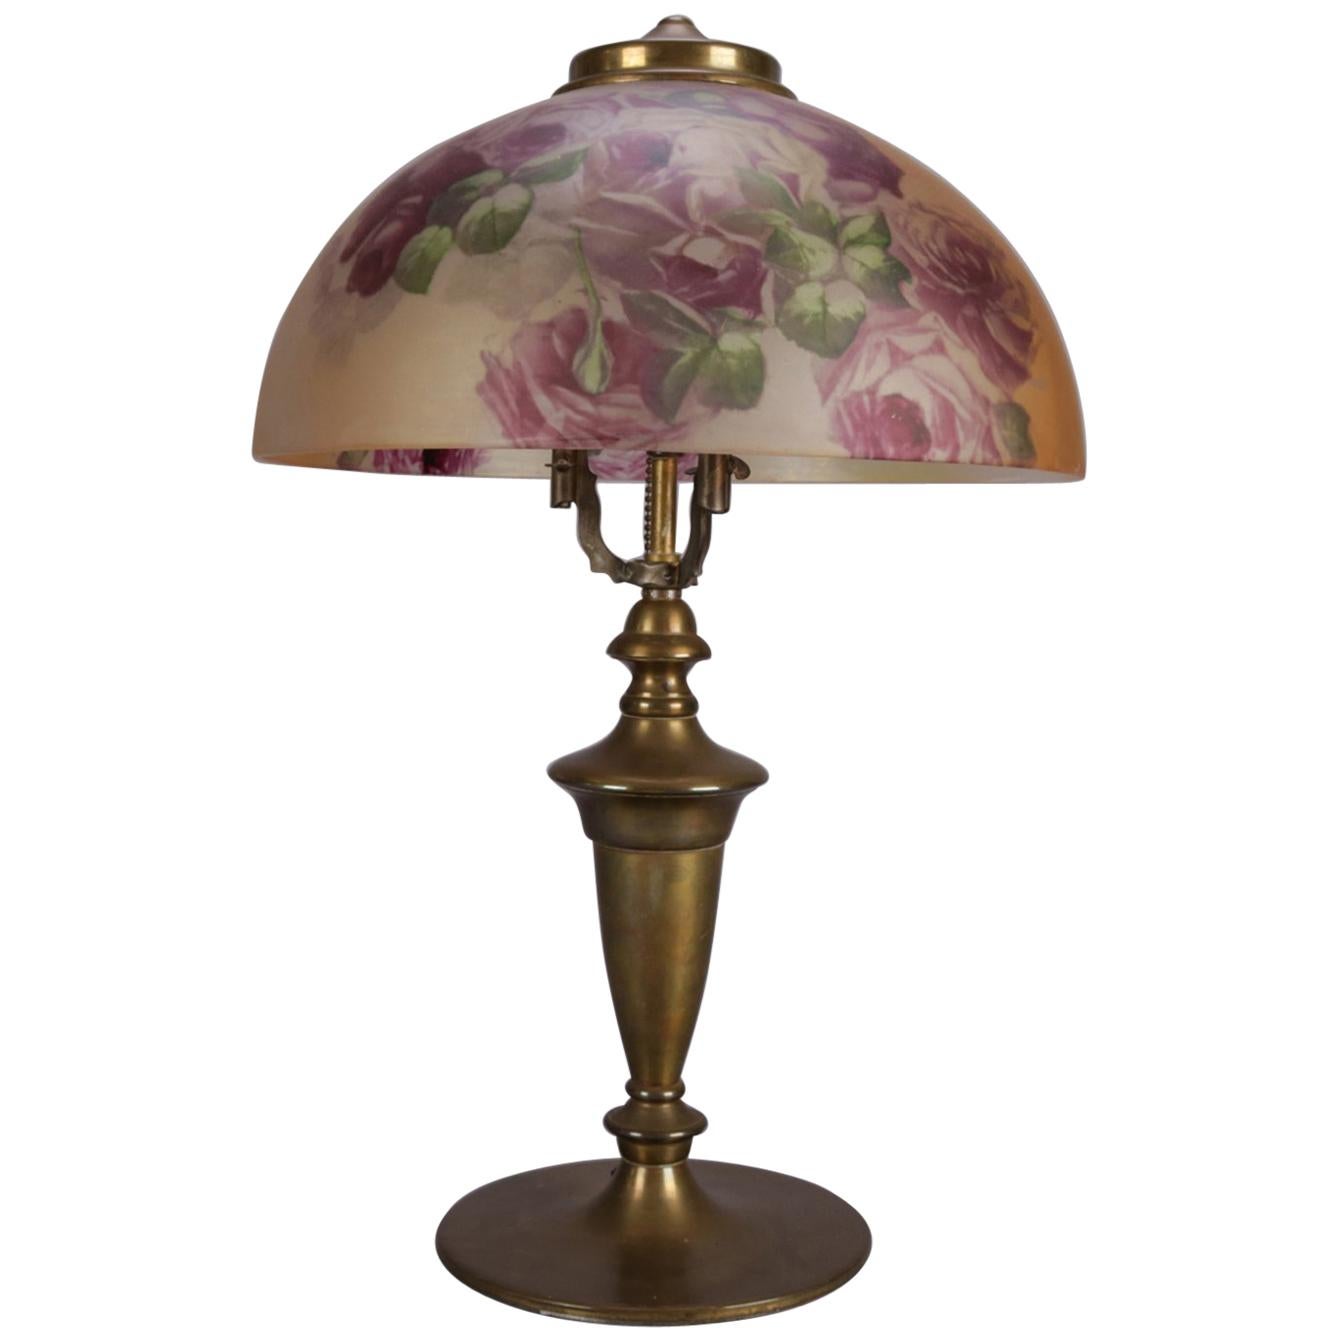 Arts & Crafts Pittsburgh Reverse Painted Table Lamp, Roses, circa 1920